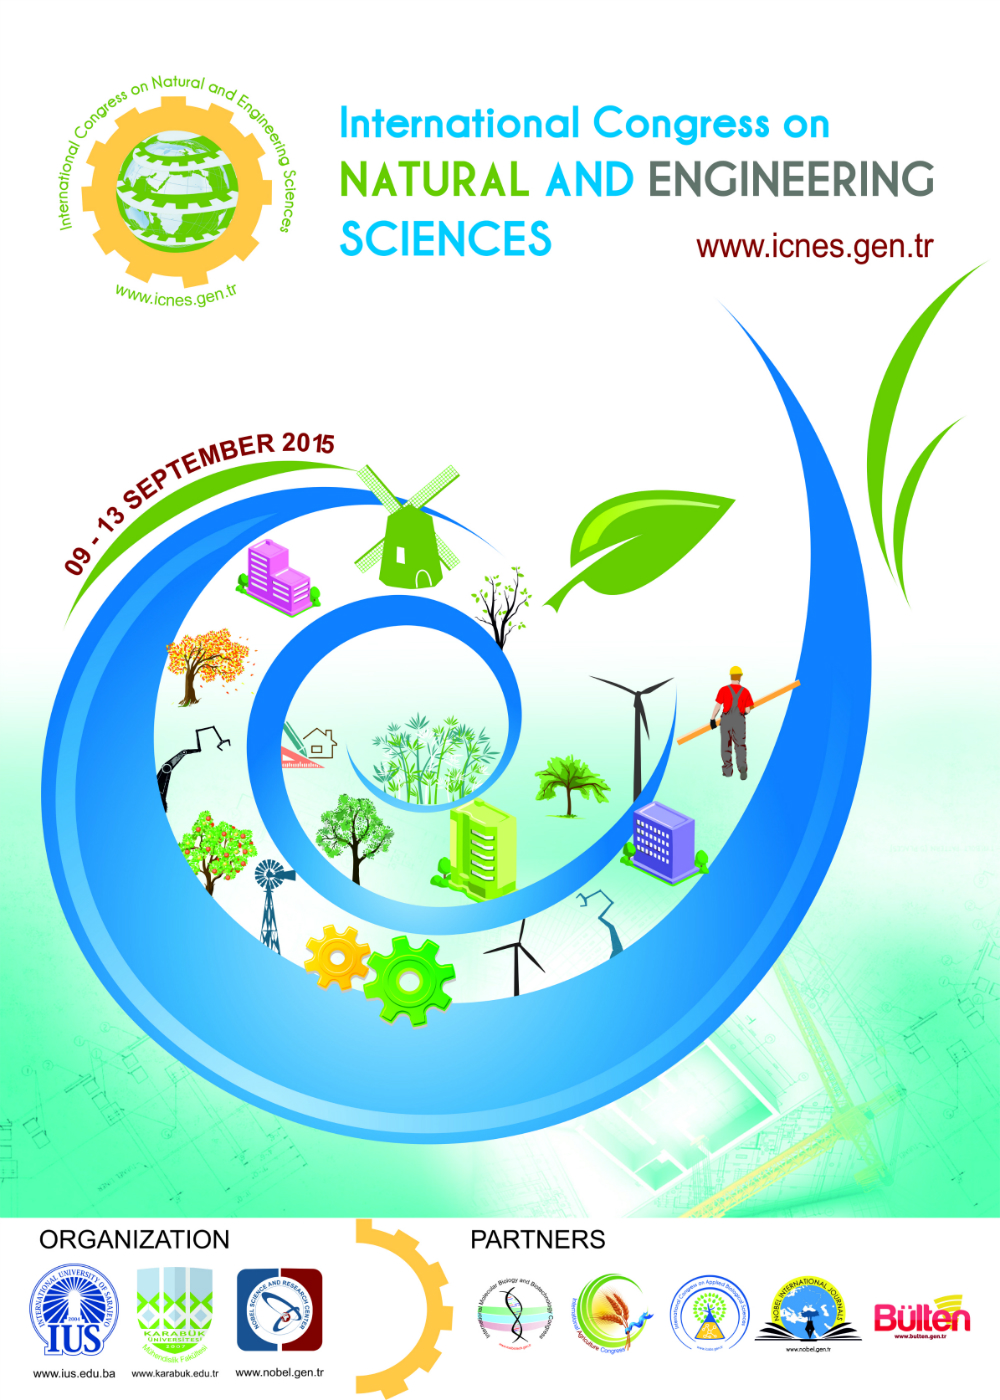  International Congress on Natural and Engineering Sciences 